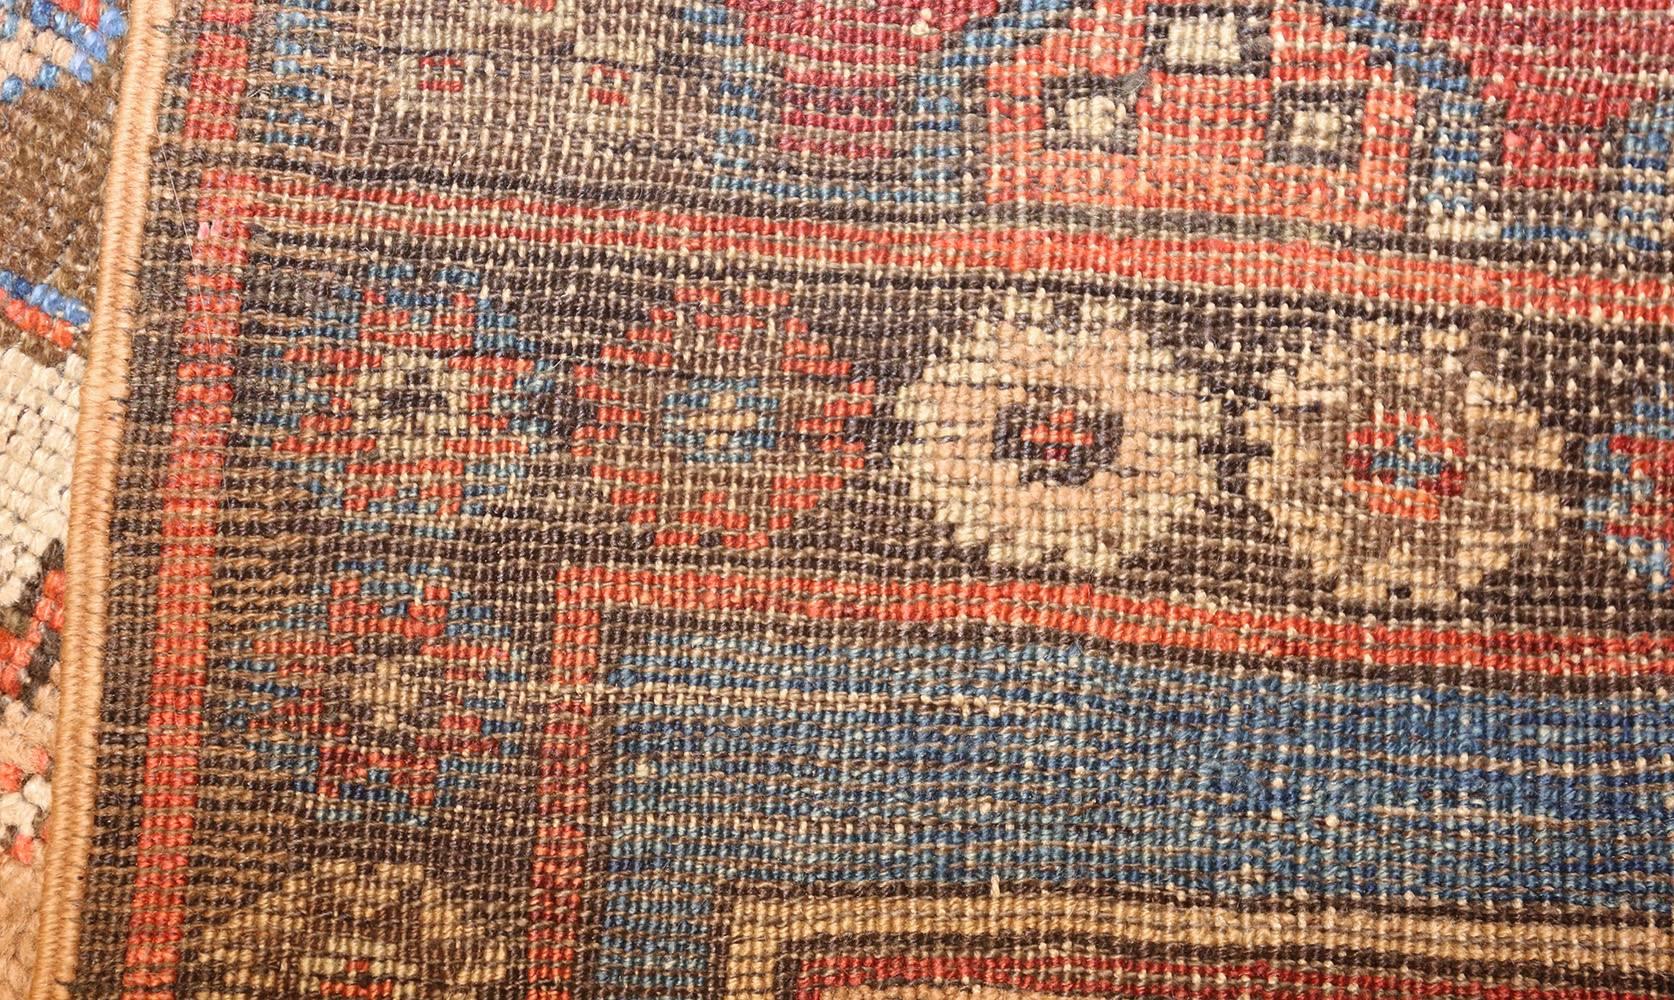 Despite its relative small size, this Karapinar beautifully exhibits noteworthy tribal elements in its borders, its field, and its eccentric medallion, offering a series of delights.

Beautiful small scatter size tribal antique Turkish Karapinar